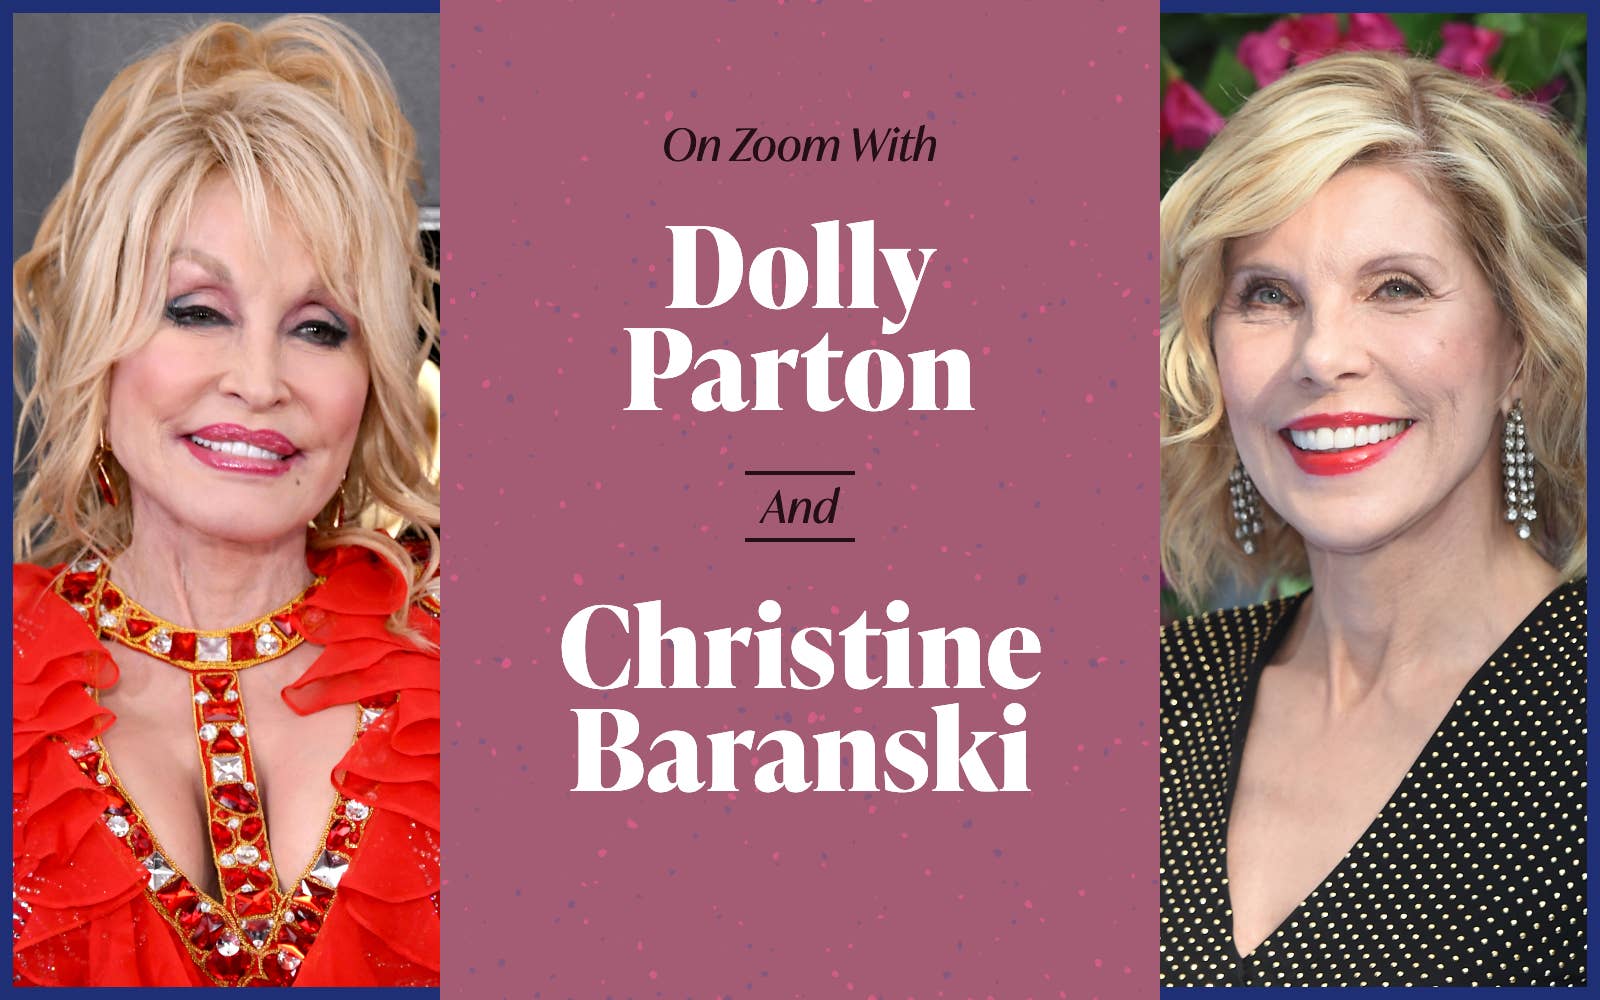 Header: &quot;On Zoom with Dolly Parton&quot;